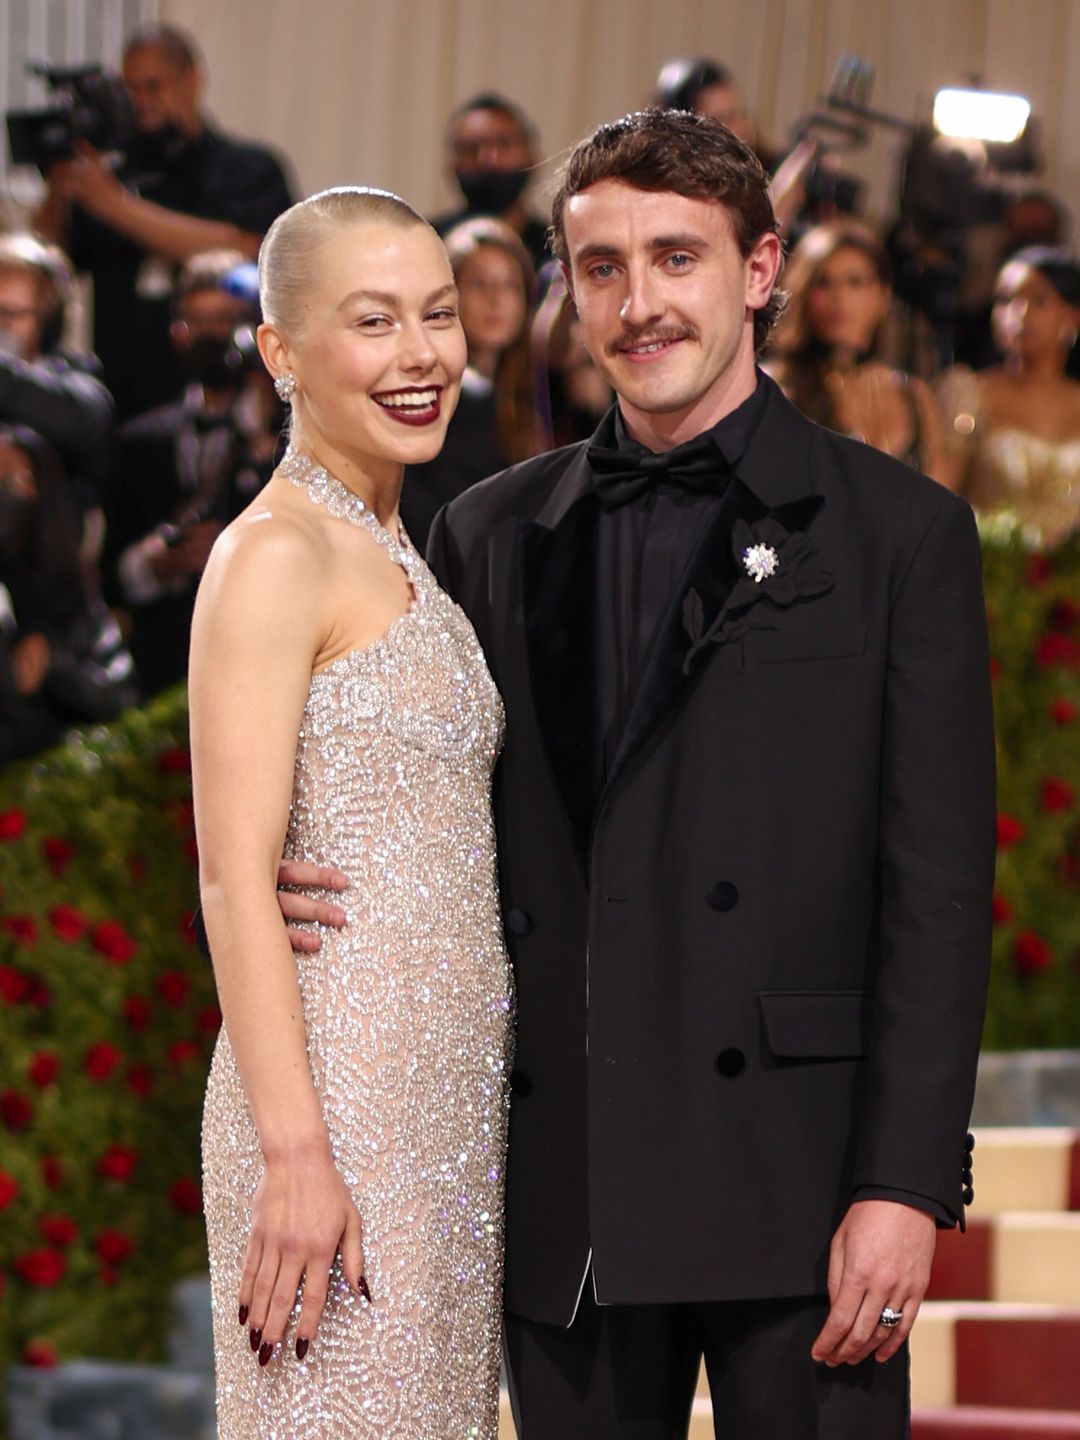 The former couple attended the Met Gala together in 2022